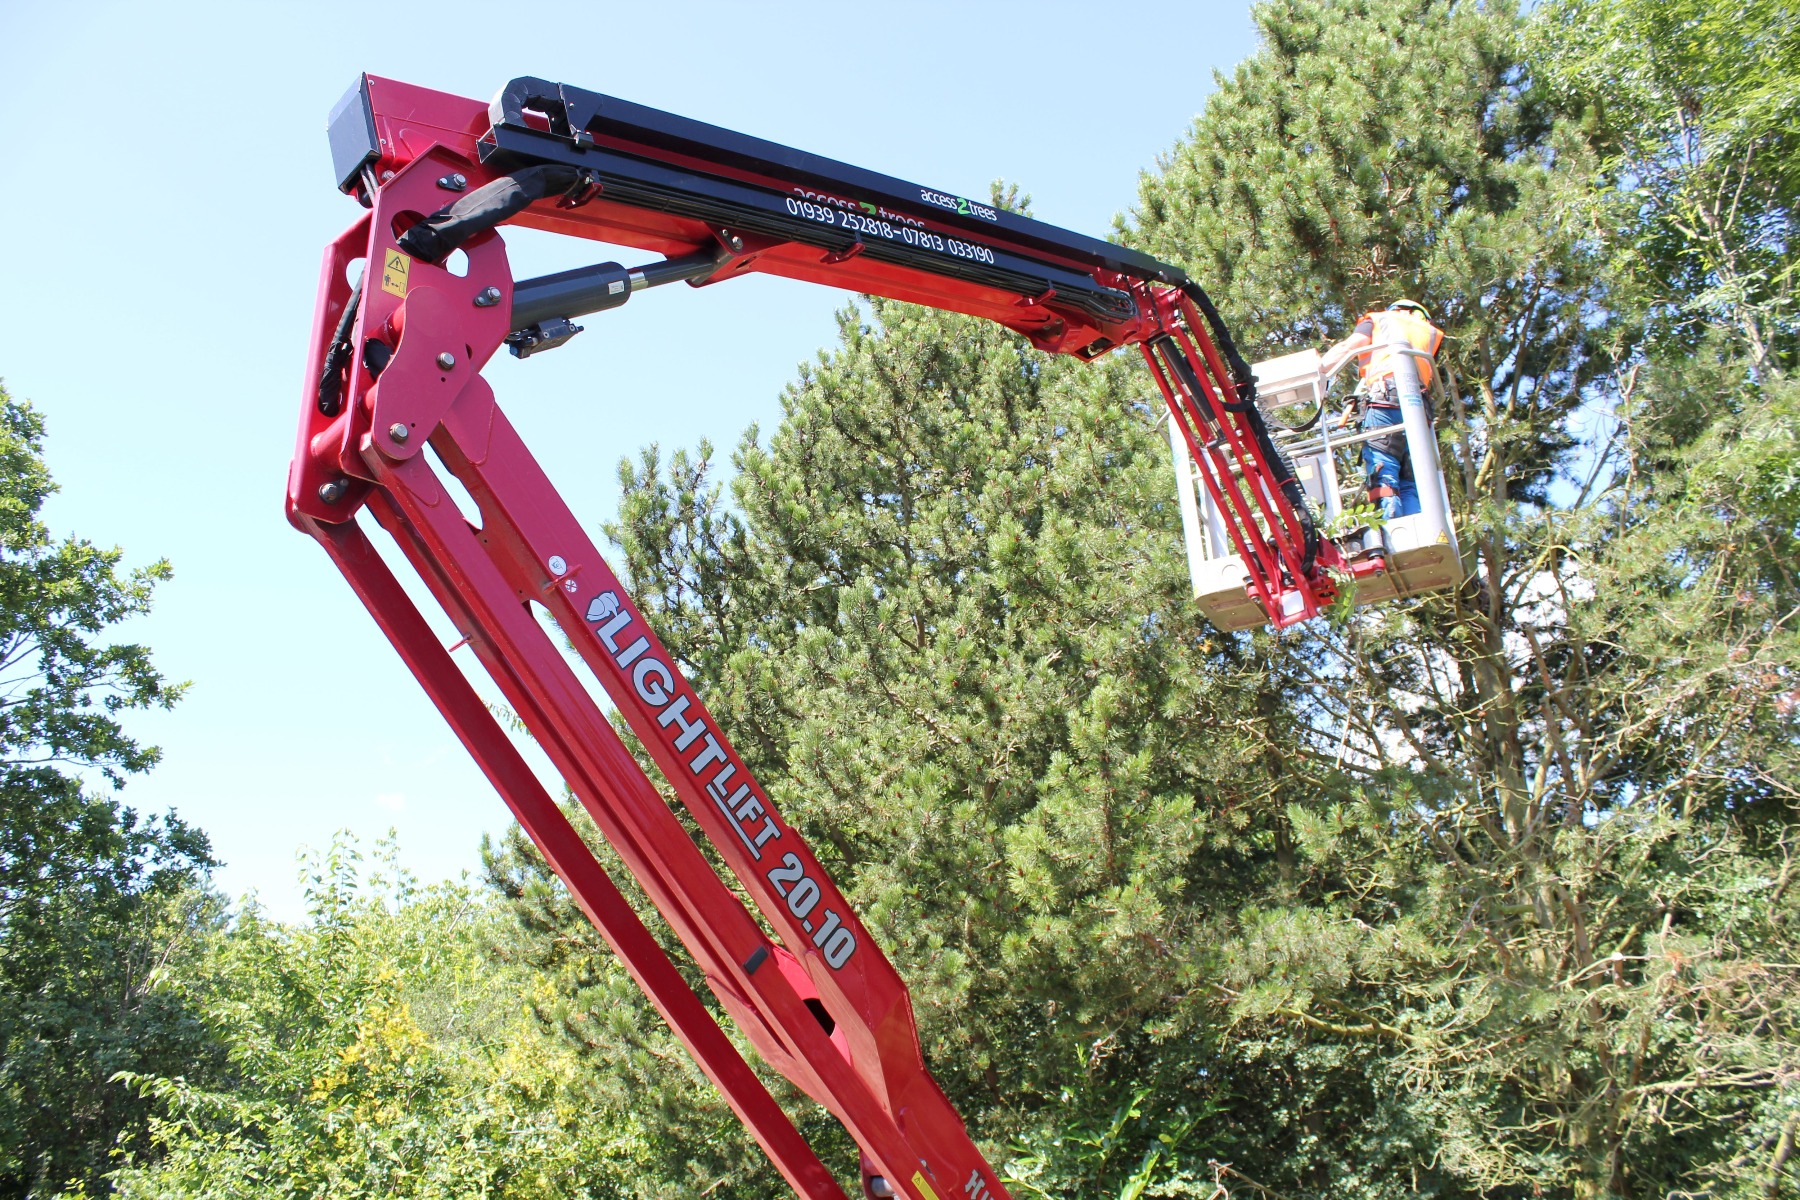 Hinowa spider lifts can be operated over sensitive ground